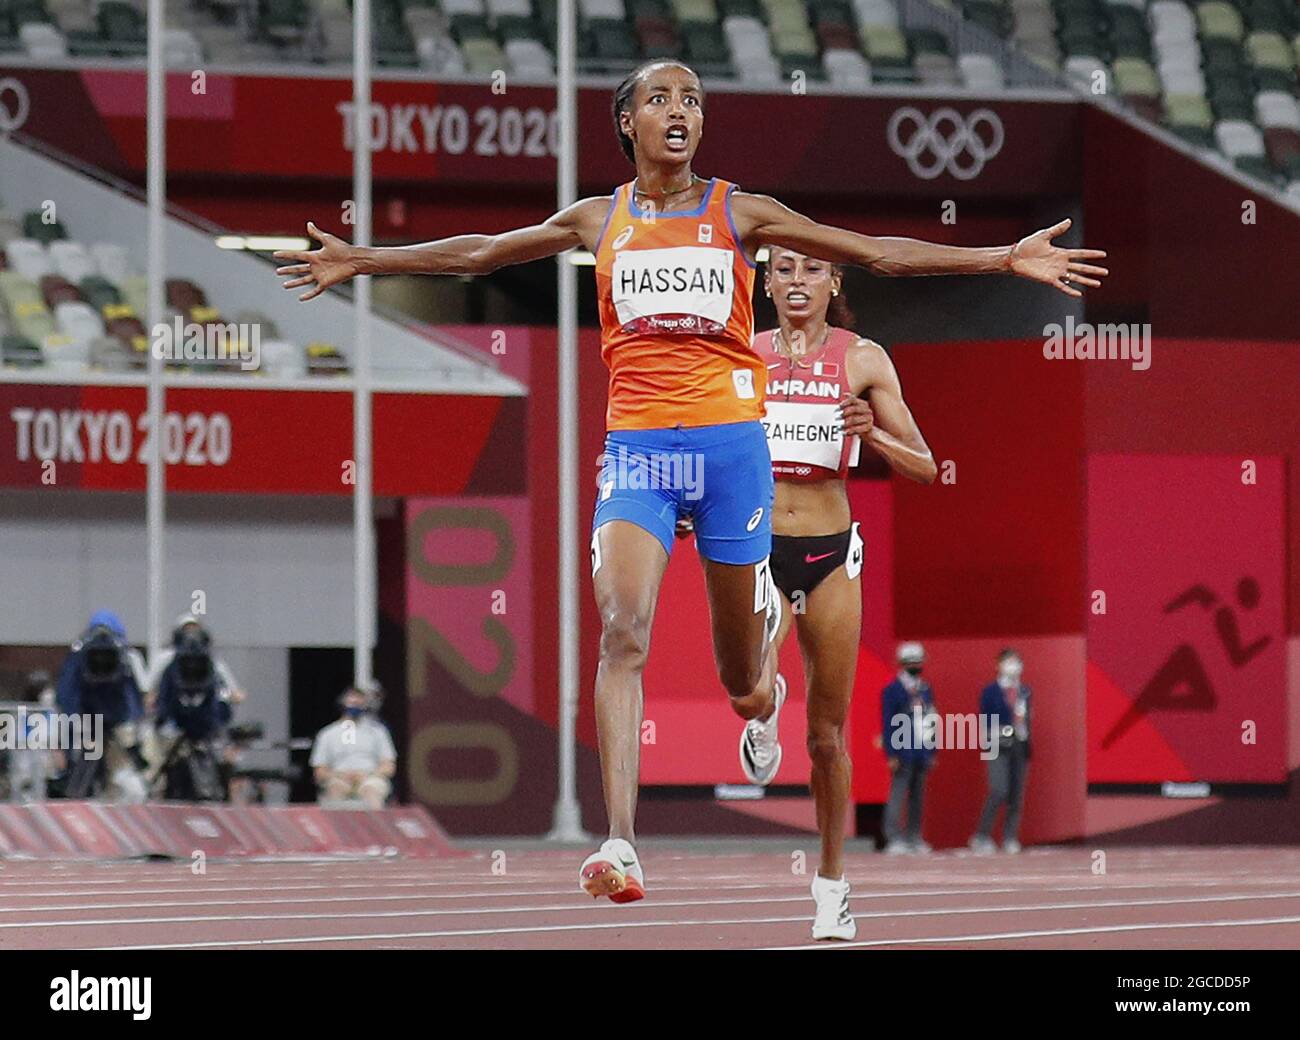 Sifan Hassan of the Netherlands and Kalkidan Gezahegne of Bahrain cross the finish line in the Women's 10,000 meter final at Olympic Stadium during the 2020 Summer Olympics in Tokyo, Japan on Saturday, August 7, 2021. Sifan Hassan of the Netherlands took gold with a time of 29:55.32, Kalkidan Gezahegne of Bahrain took silver with a time of 29:56.18 and Letesenbet Gidey of Ethiopia took bronze with a time of 30:01.72.  Photo by Bob Strong/UPI Stock Photo